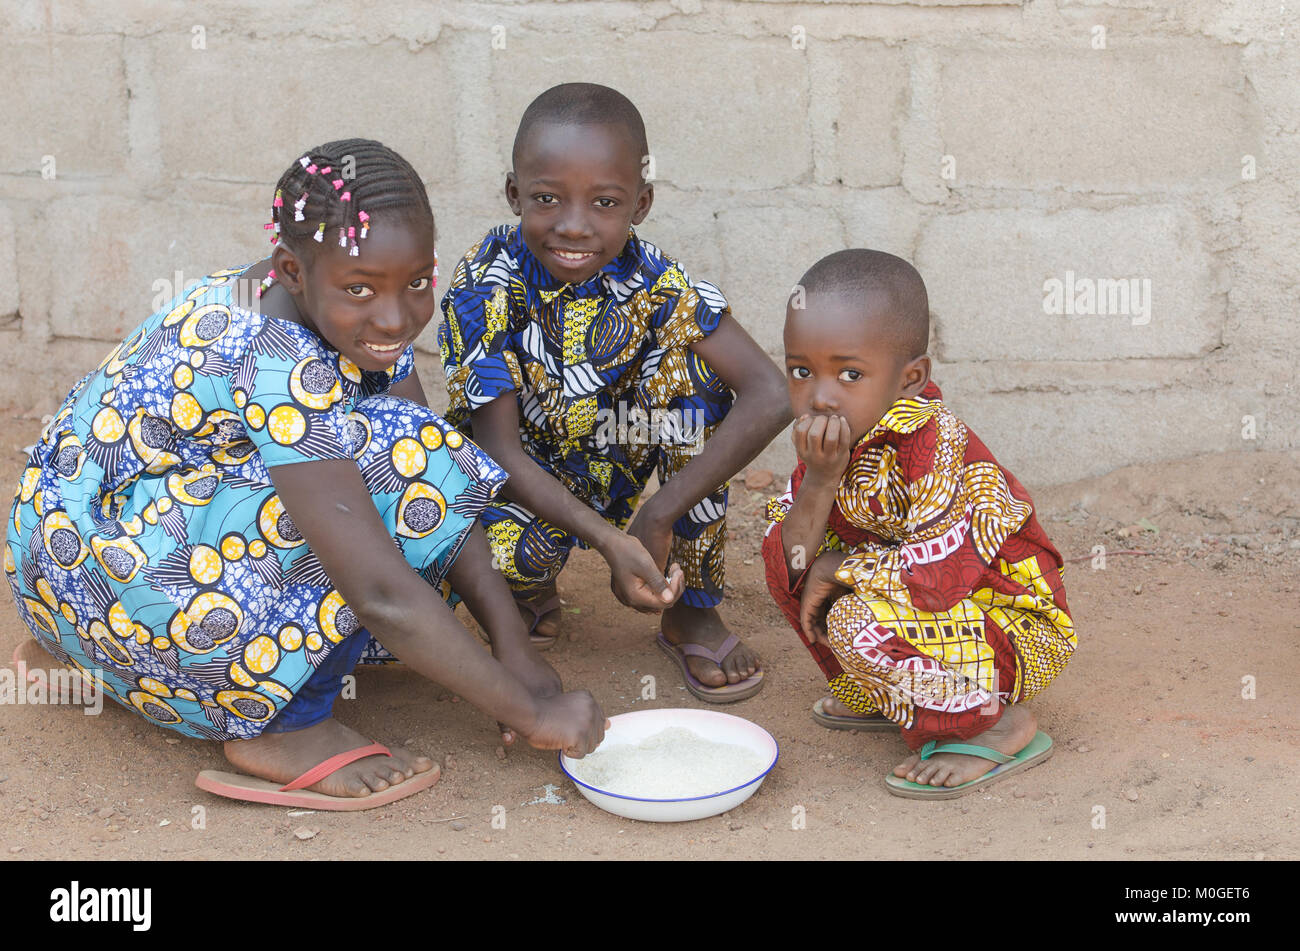 Three African Children Sitting Outdoors Eating Rice in Africa Stock Photo